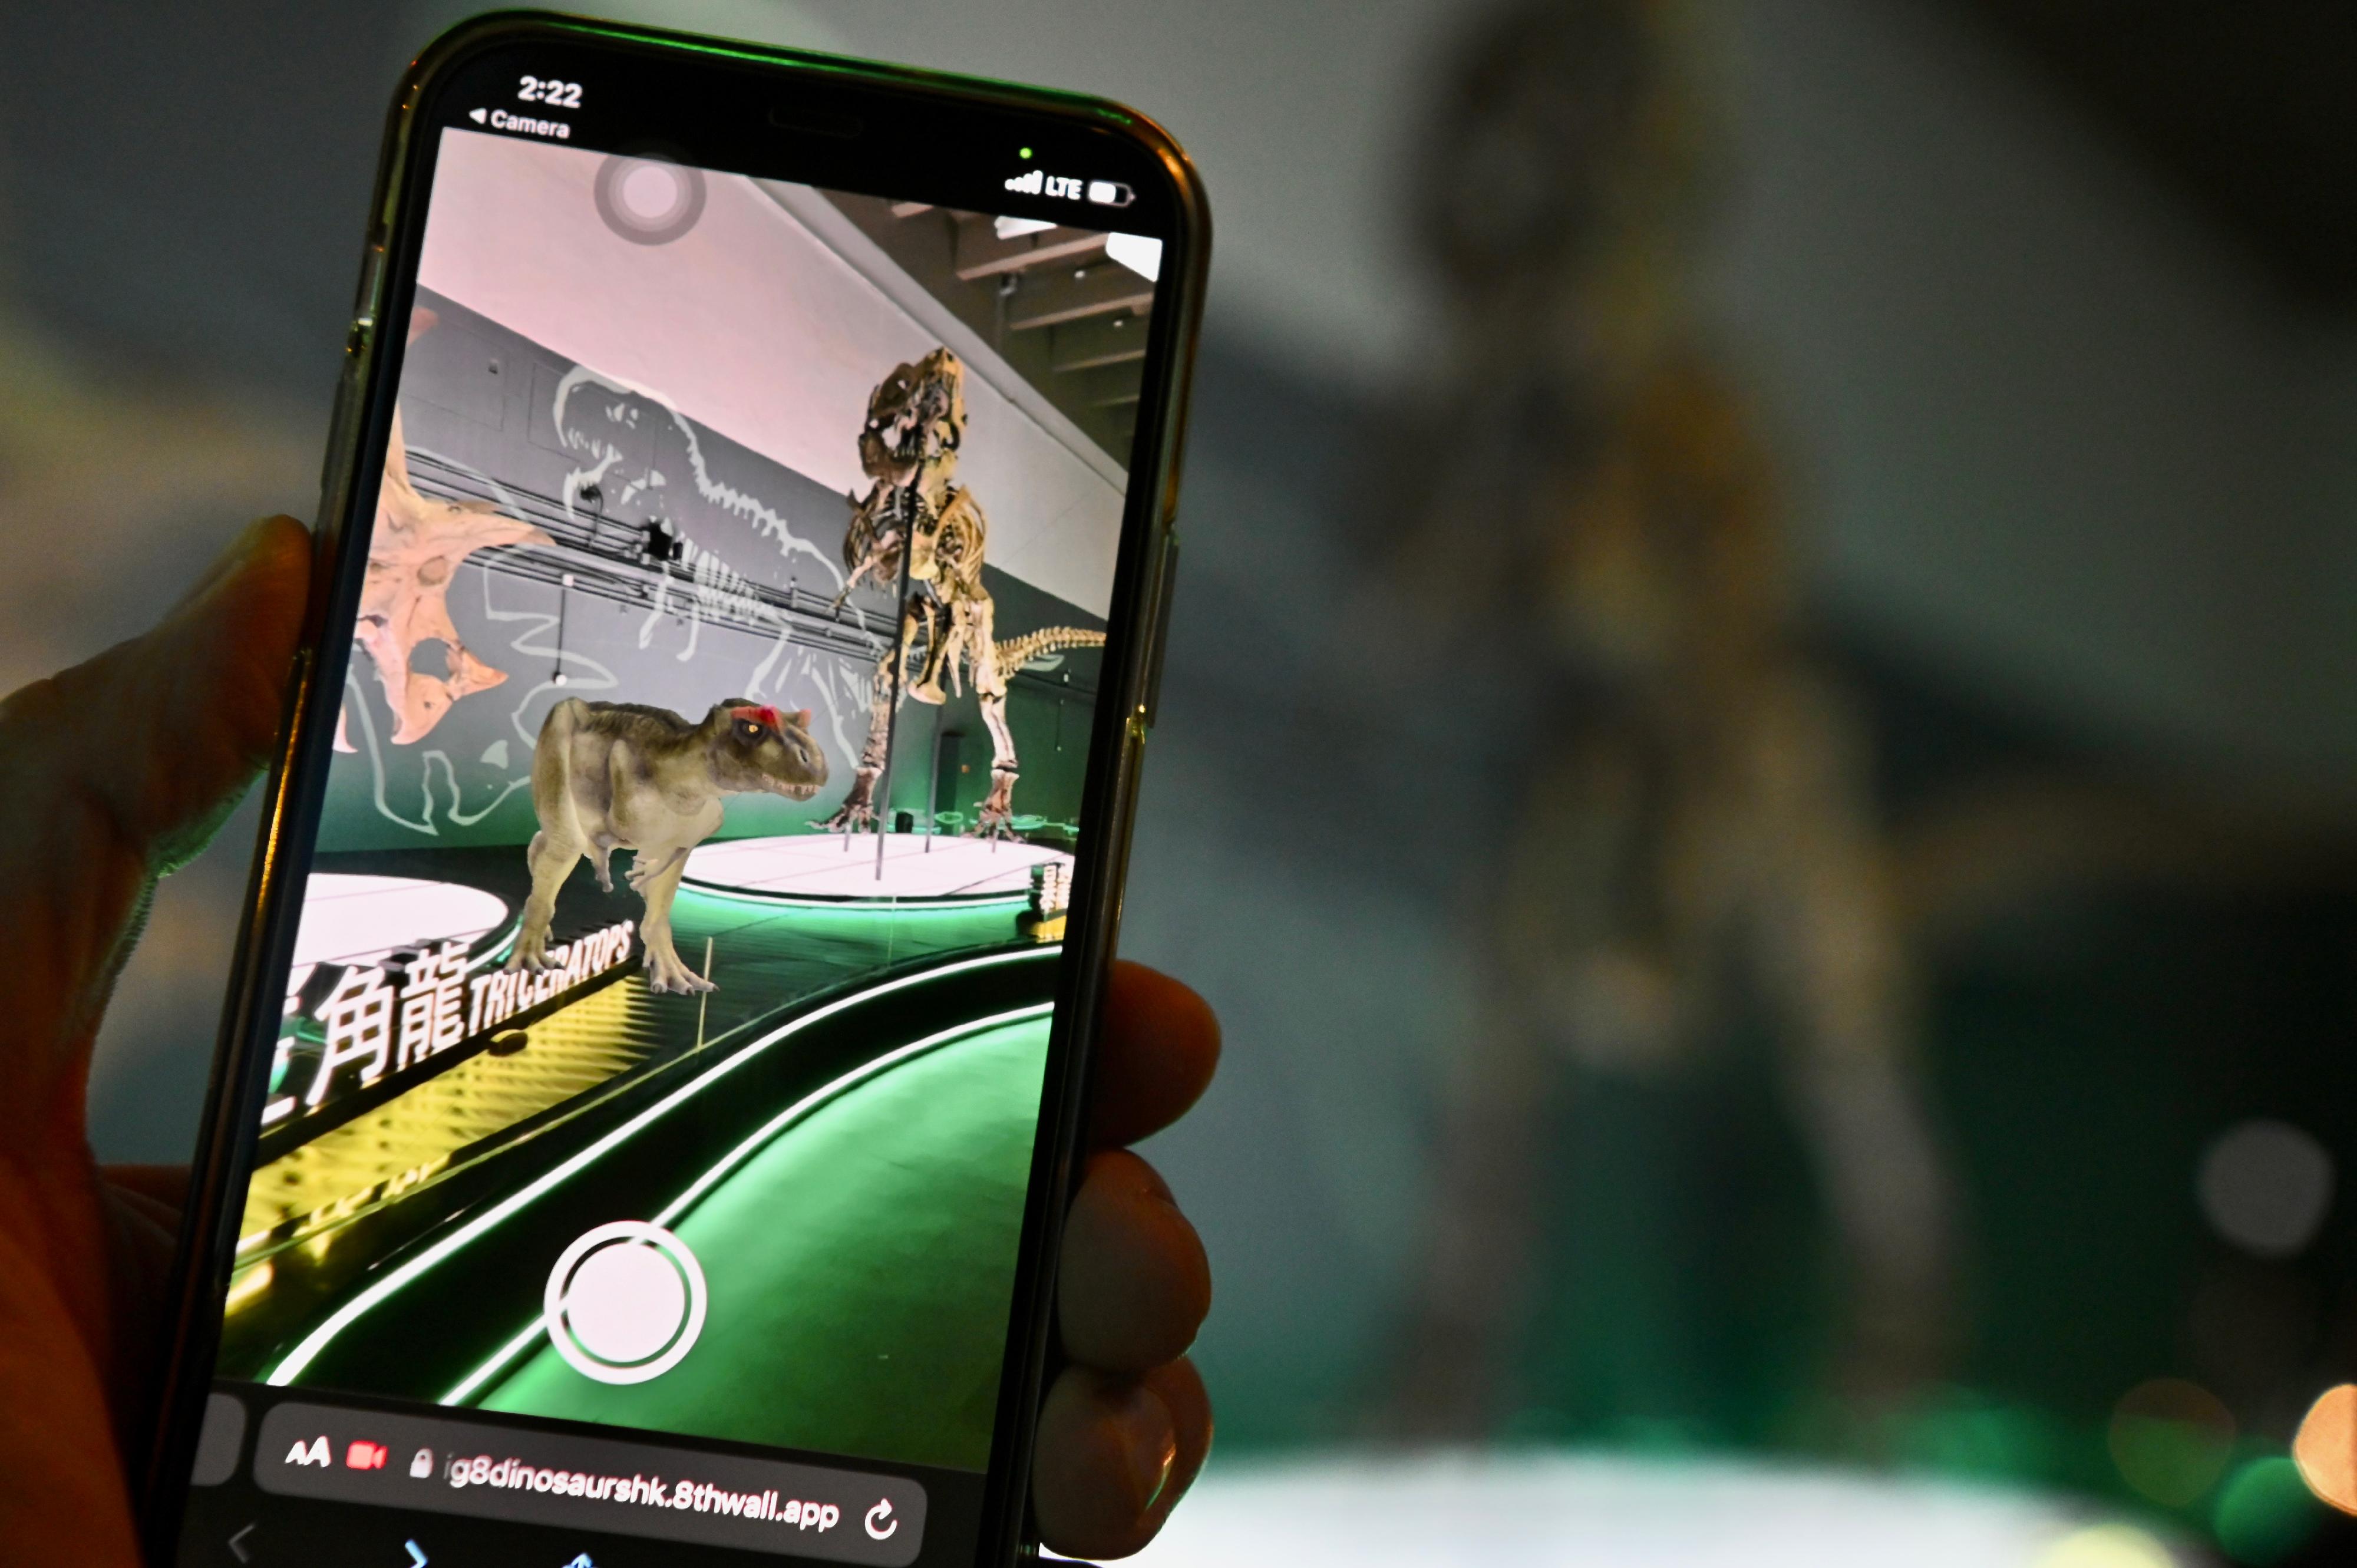 The Hong Kong Science Museum's free large-scale dinosaur exhibition, "The Hong Kong Jockey Club Series: The Big Eight - Dinosaur Revelation" has received an overwhelming public response since its opening in July. Picture shows a visitor employing augmented reality technology to interact with dinosaurs through a smartphone.